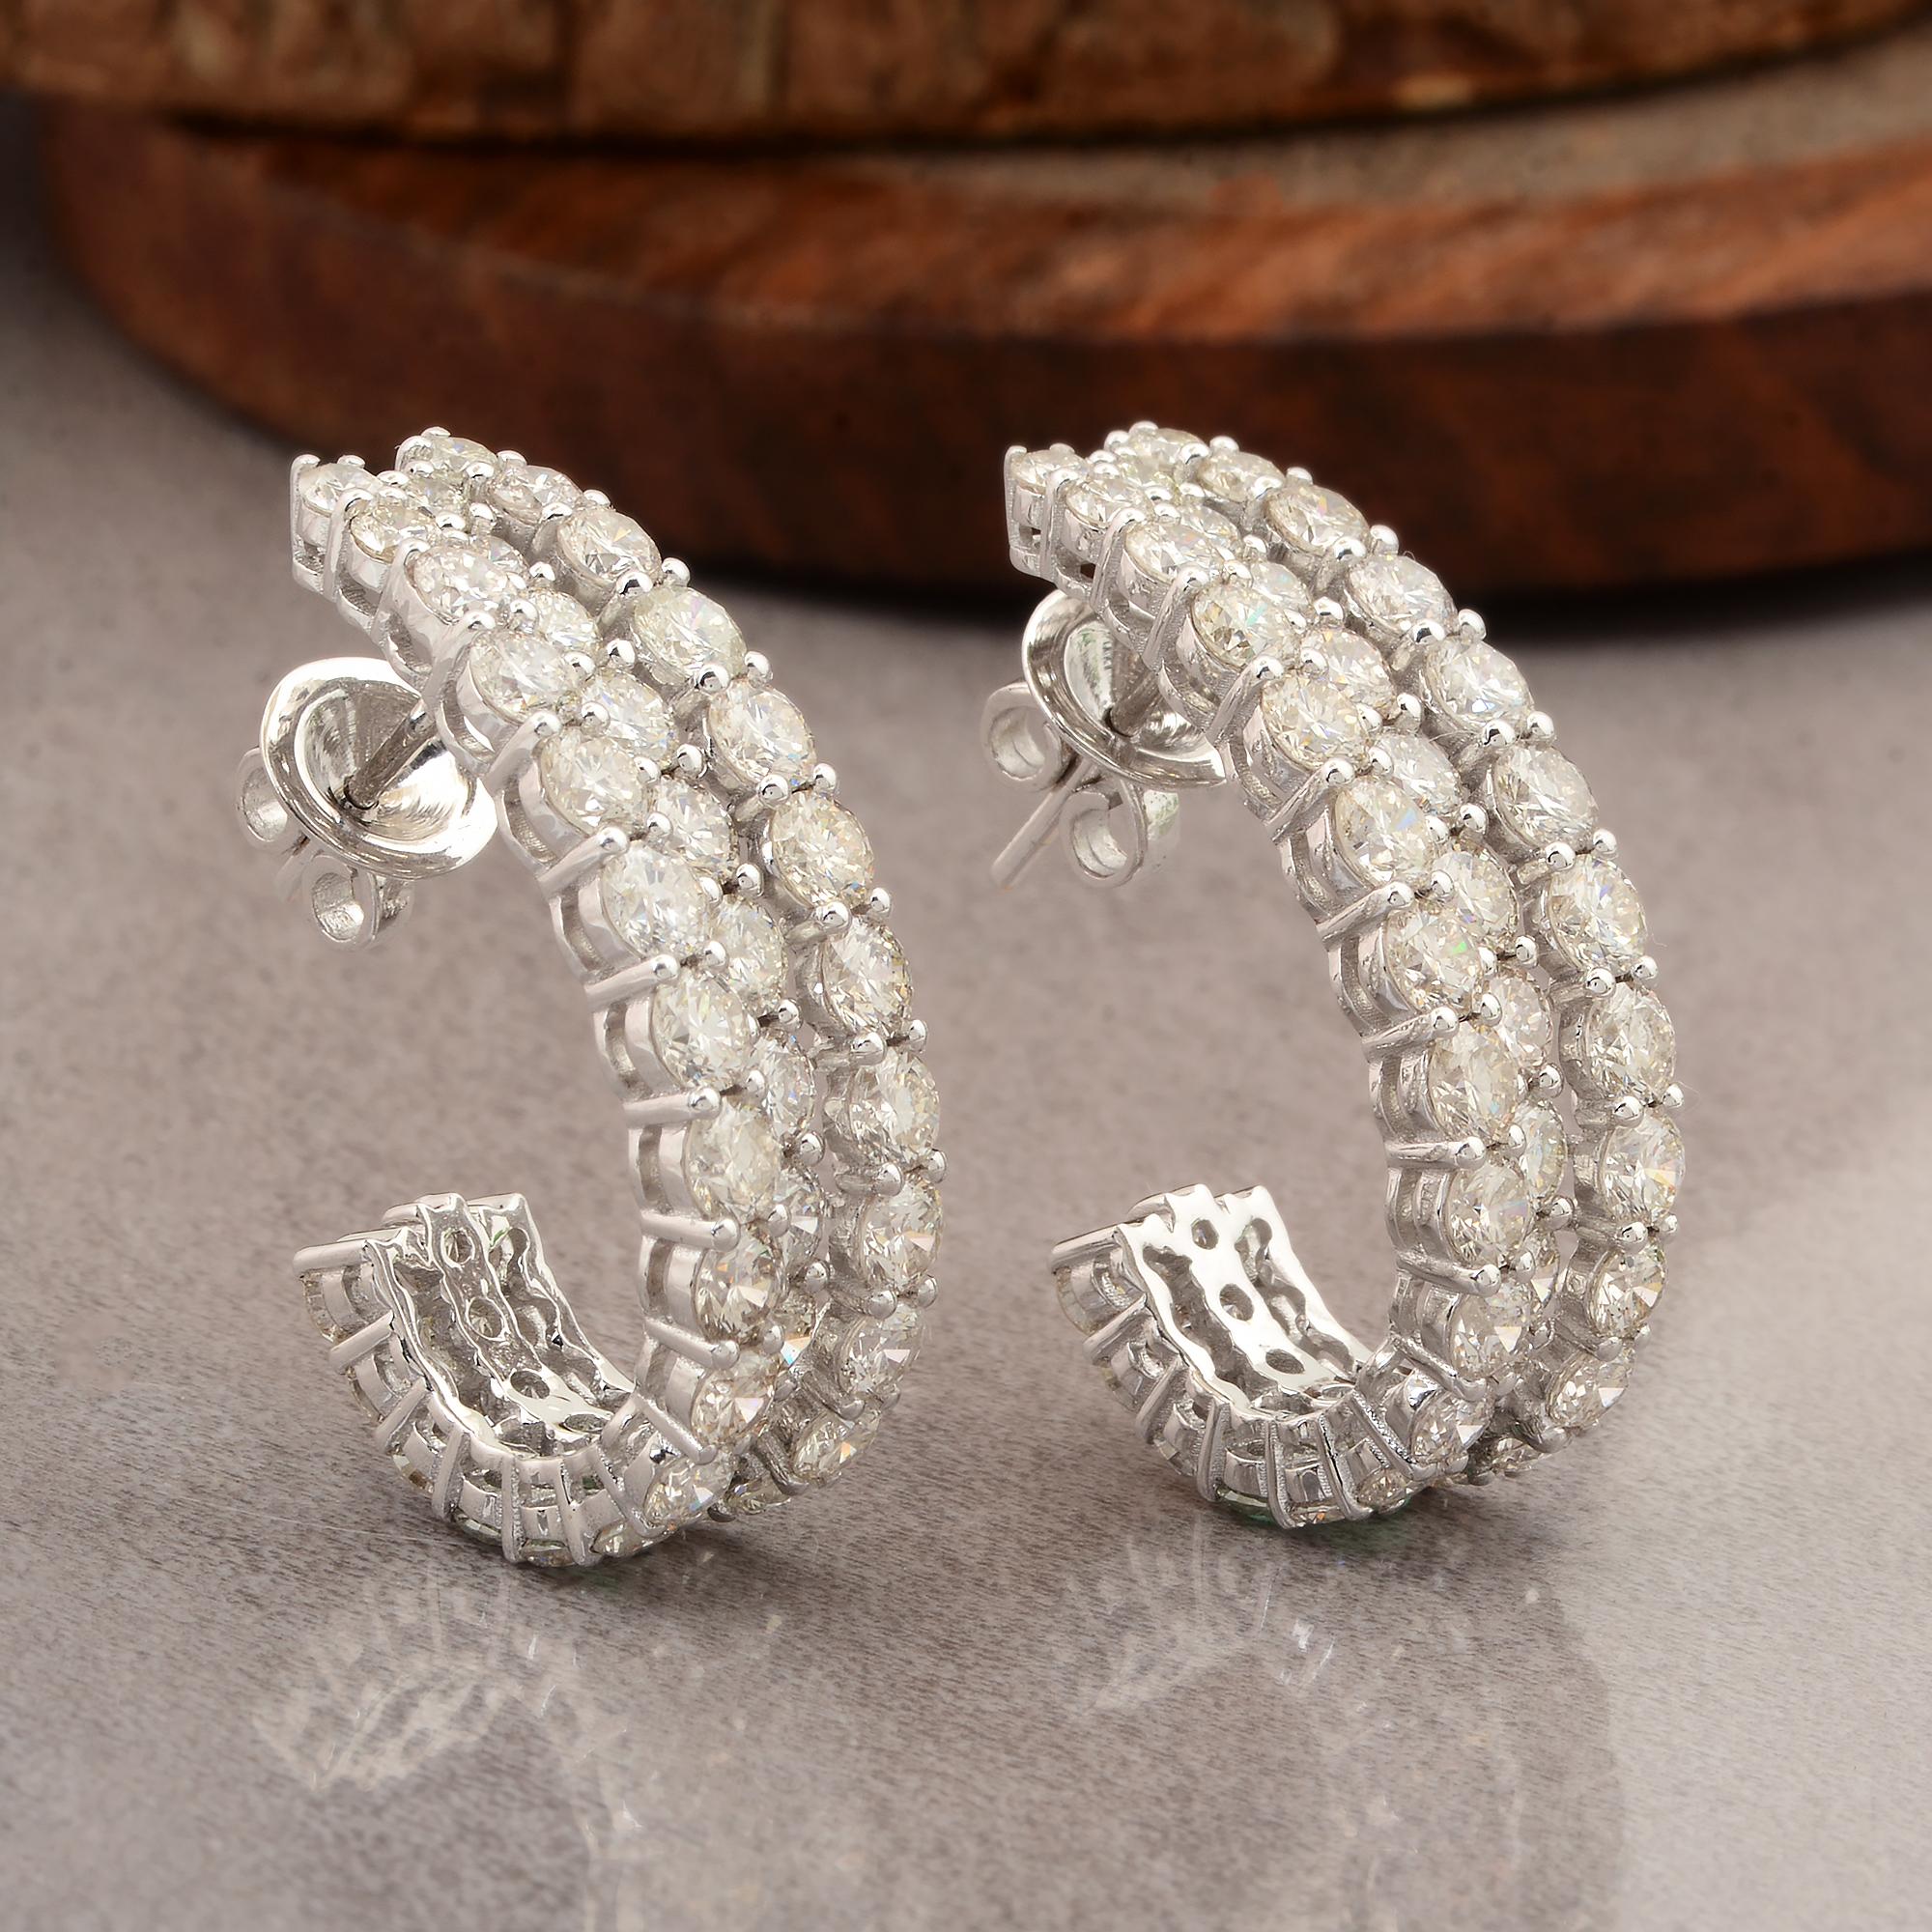 Modern Natural 9.60 Carat Round Diamond Half Hoop Earrings Solid 14k White Gold Jewelry For Sale